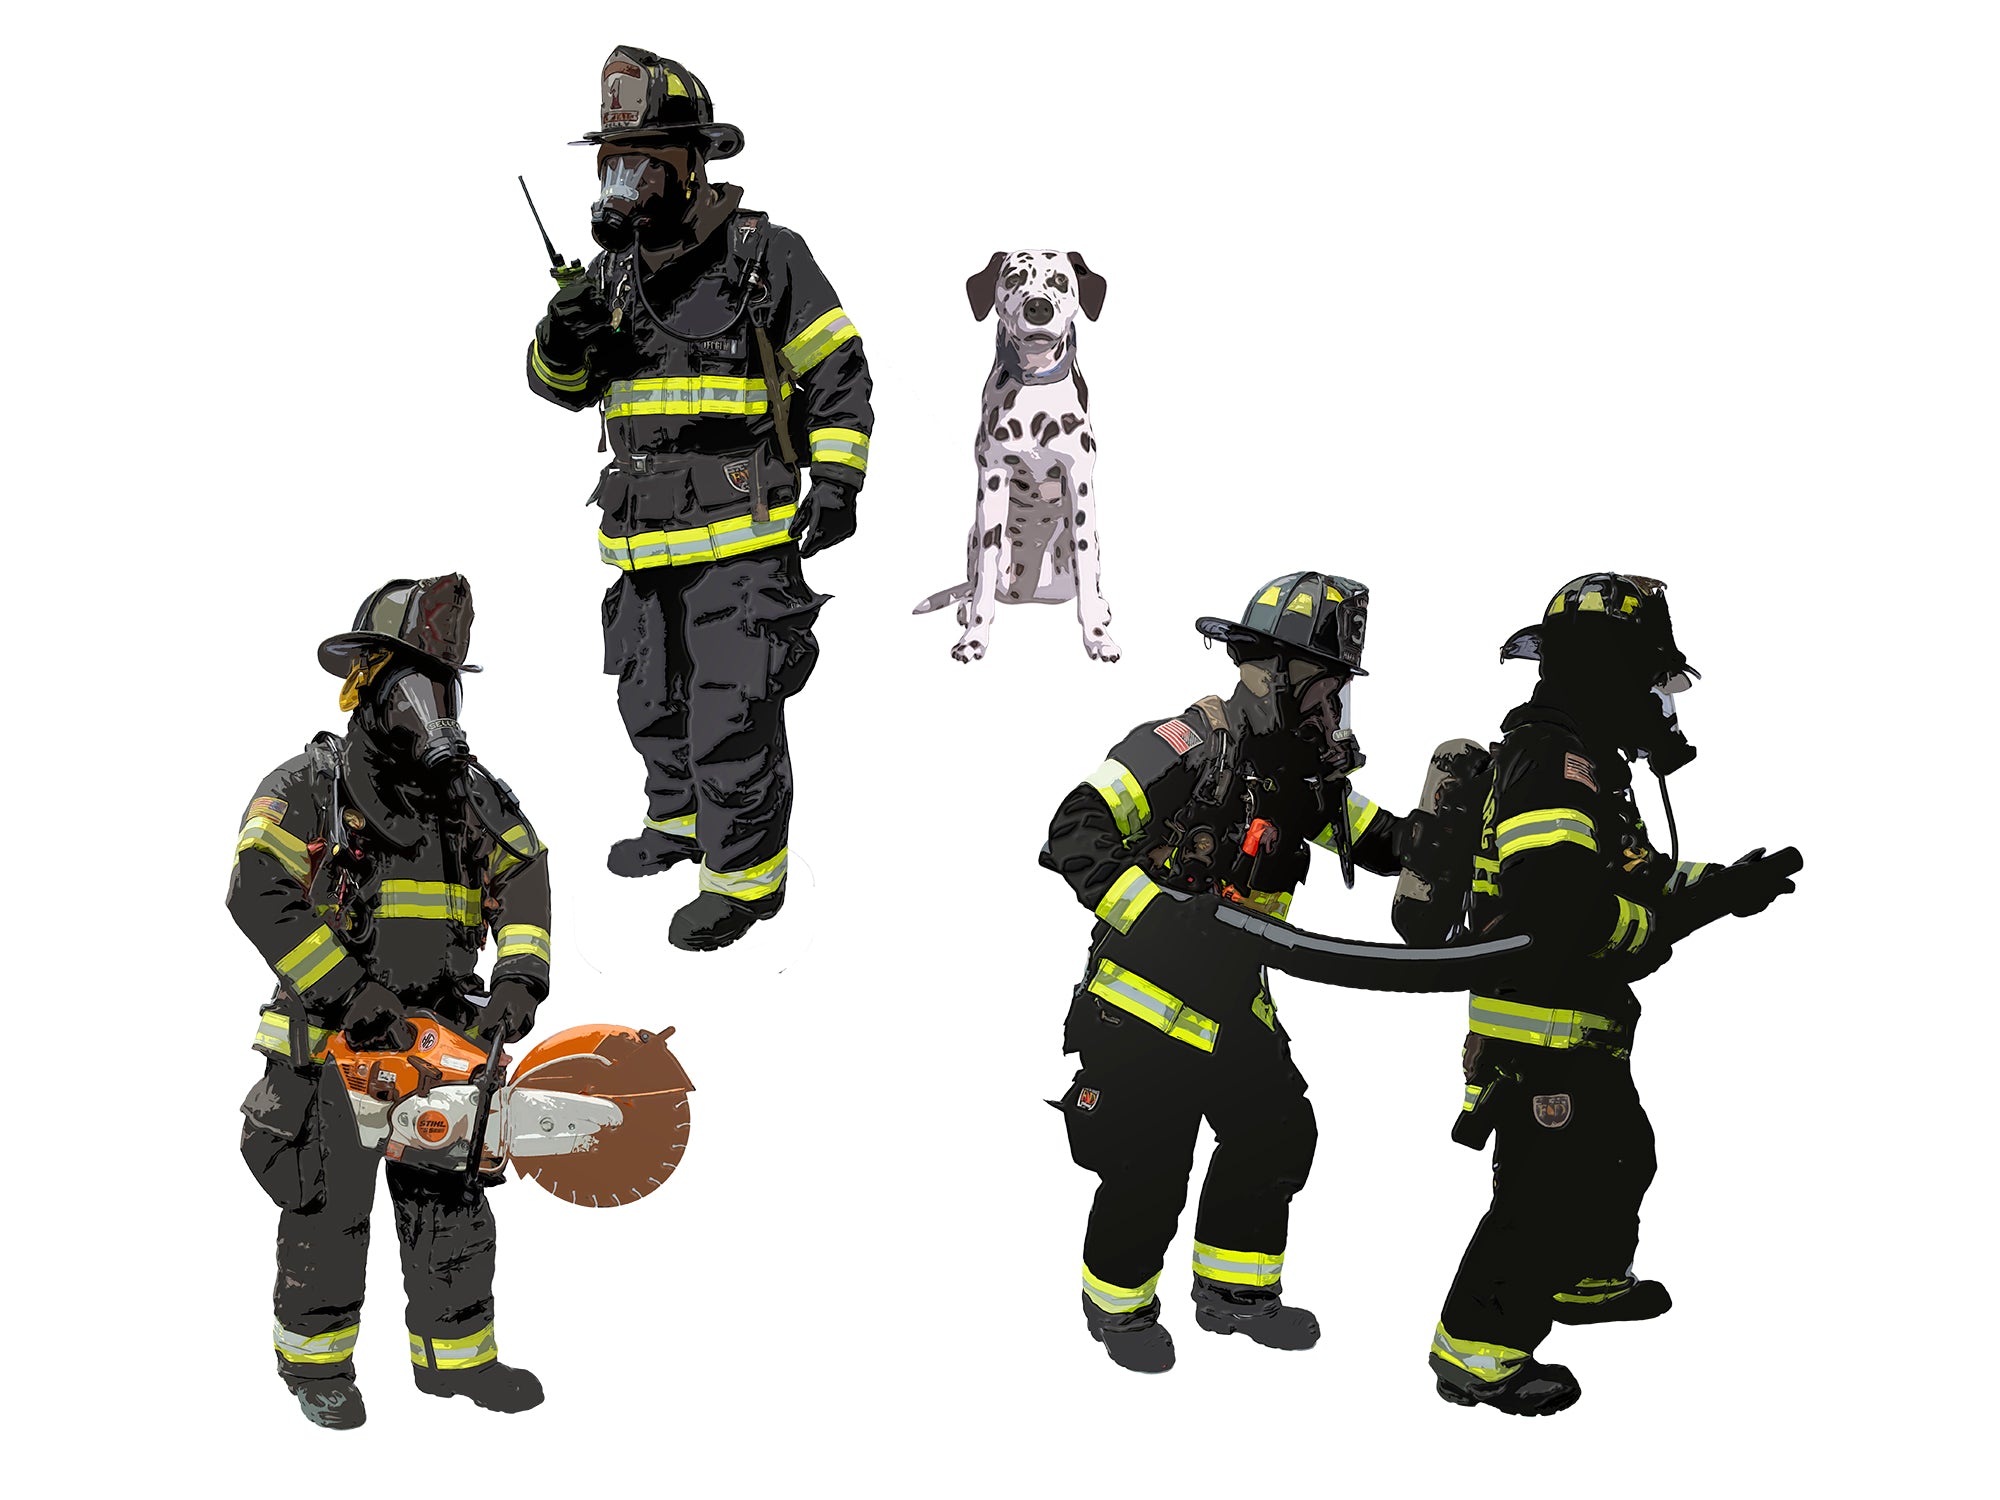 Lionel 2230180 - Firefighter Figures and Dog (4-Pack)